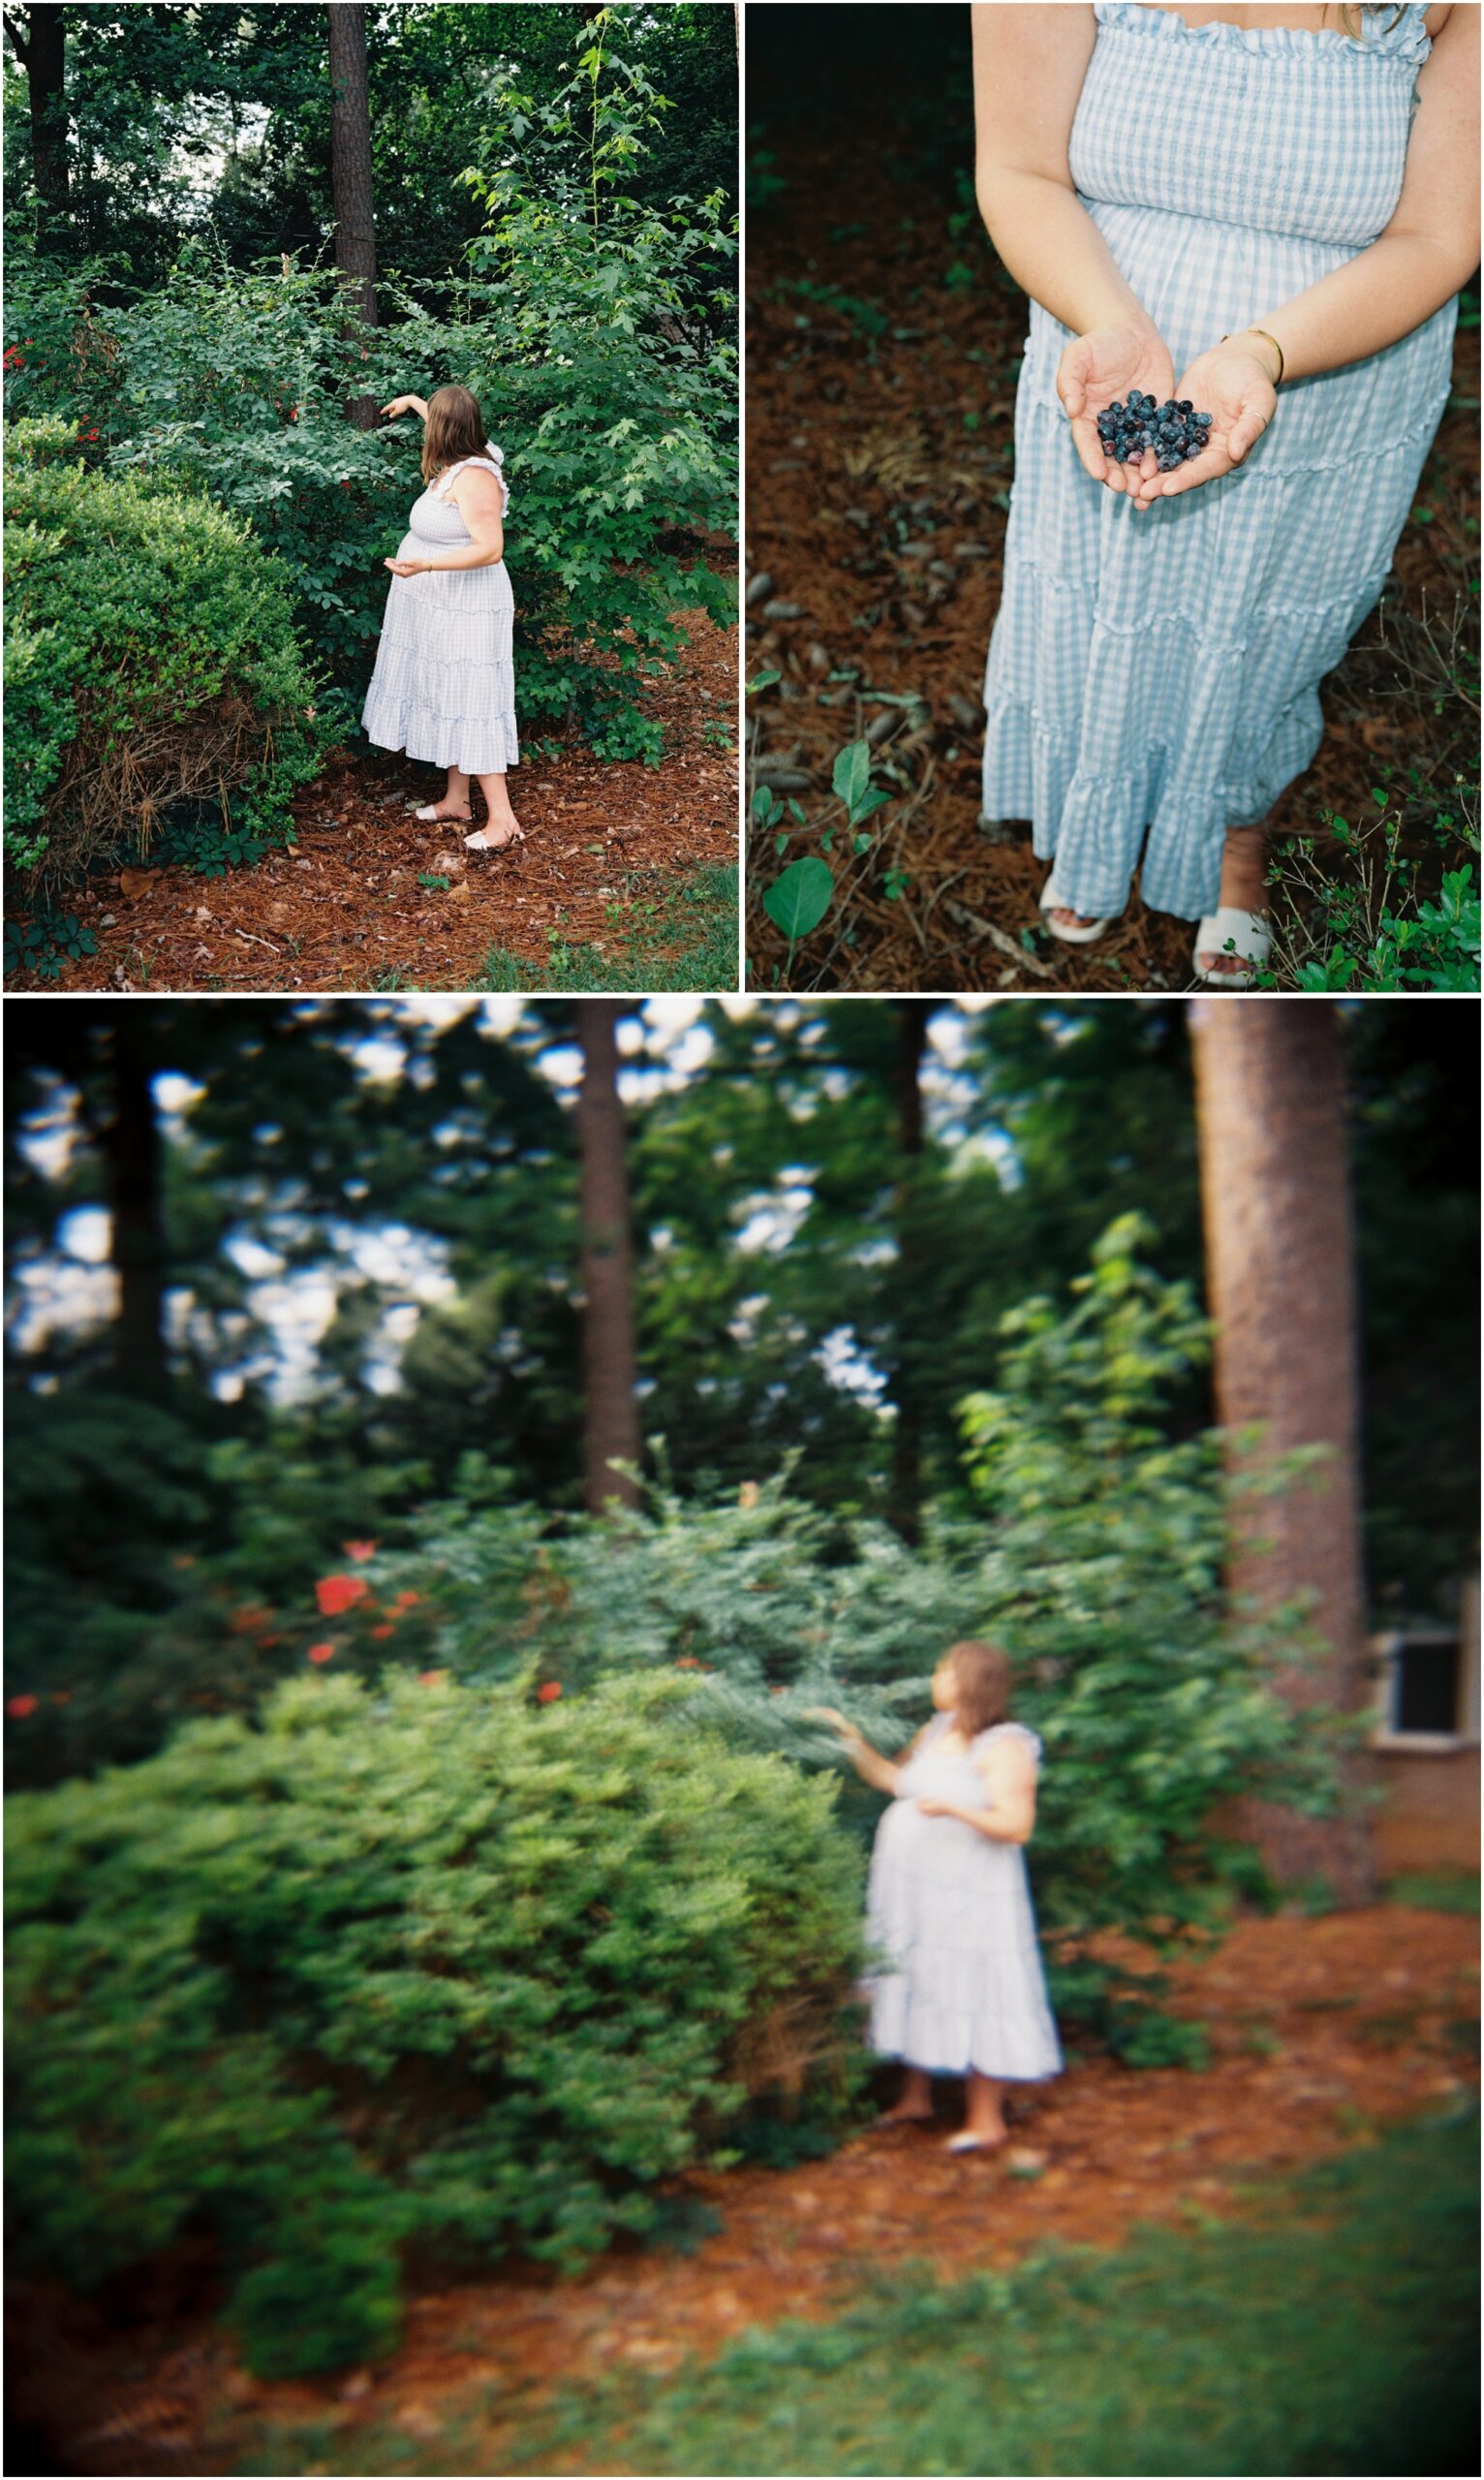 maternity photos while picking blueberries on 120mm film